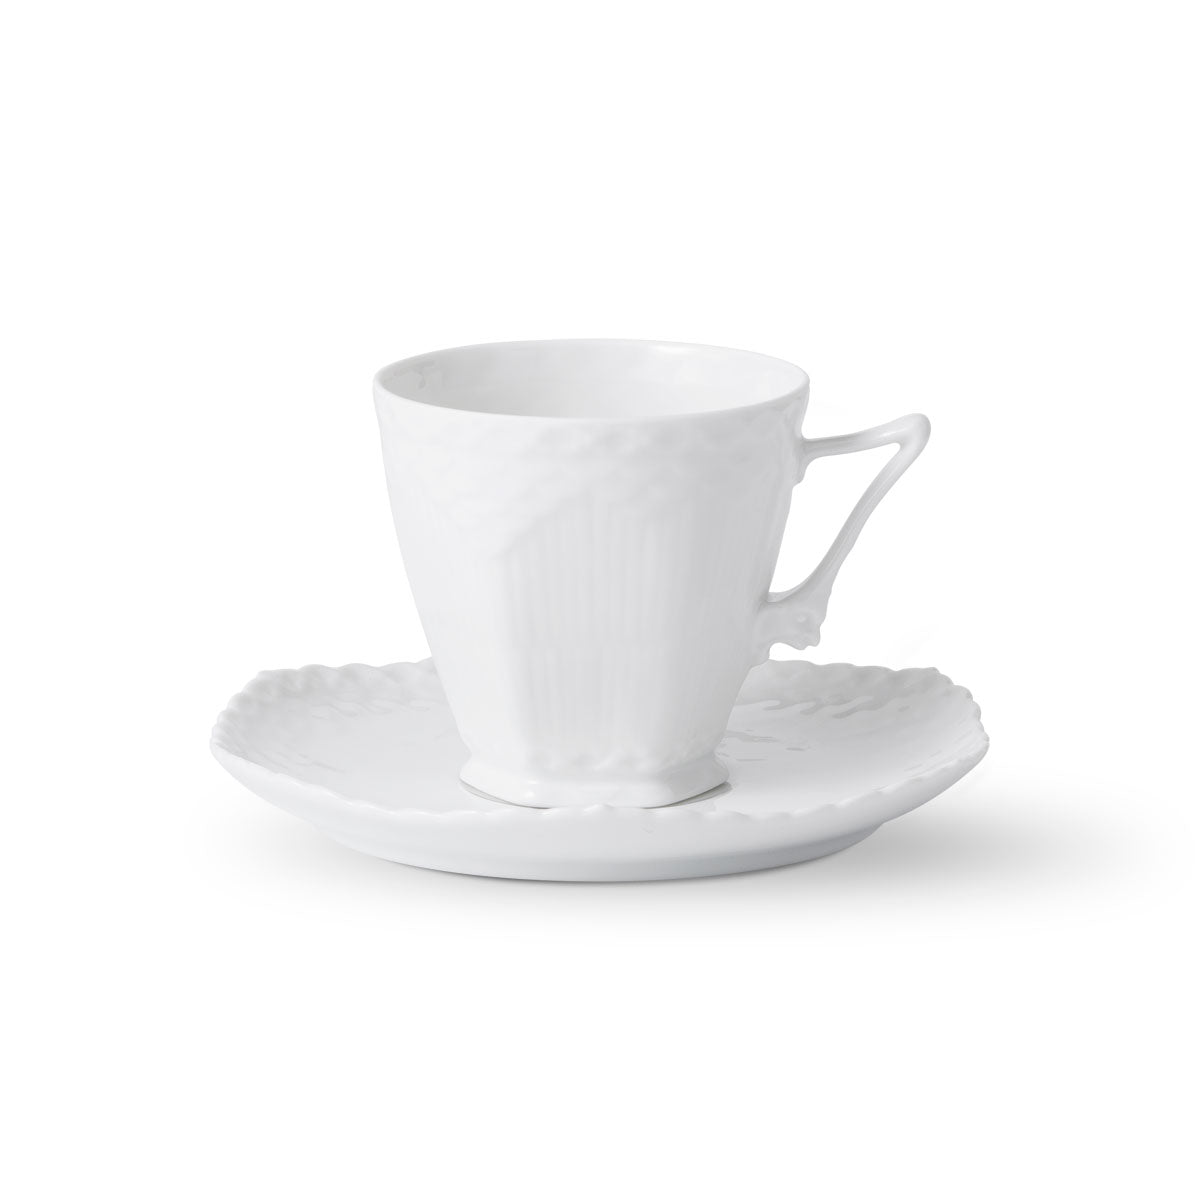 WHITE FLUTED FULL LACE COFFEE CUP & SAUCER 5 OZ / 14 cl